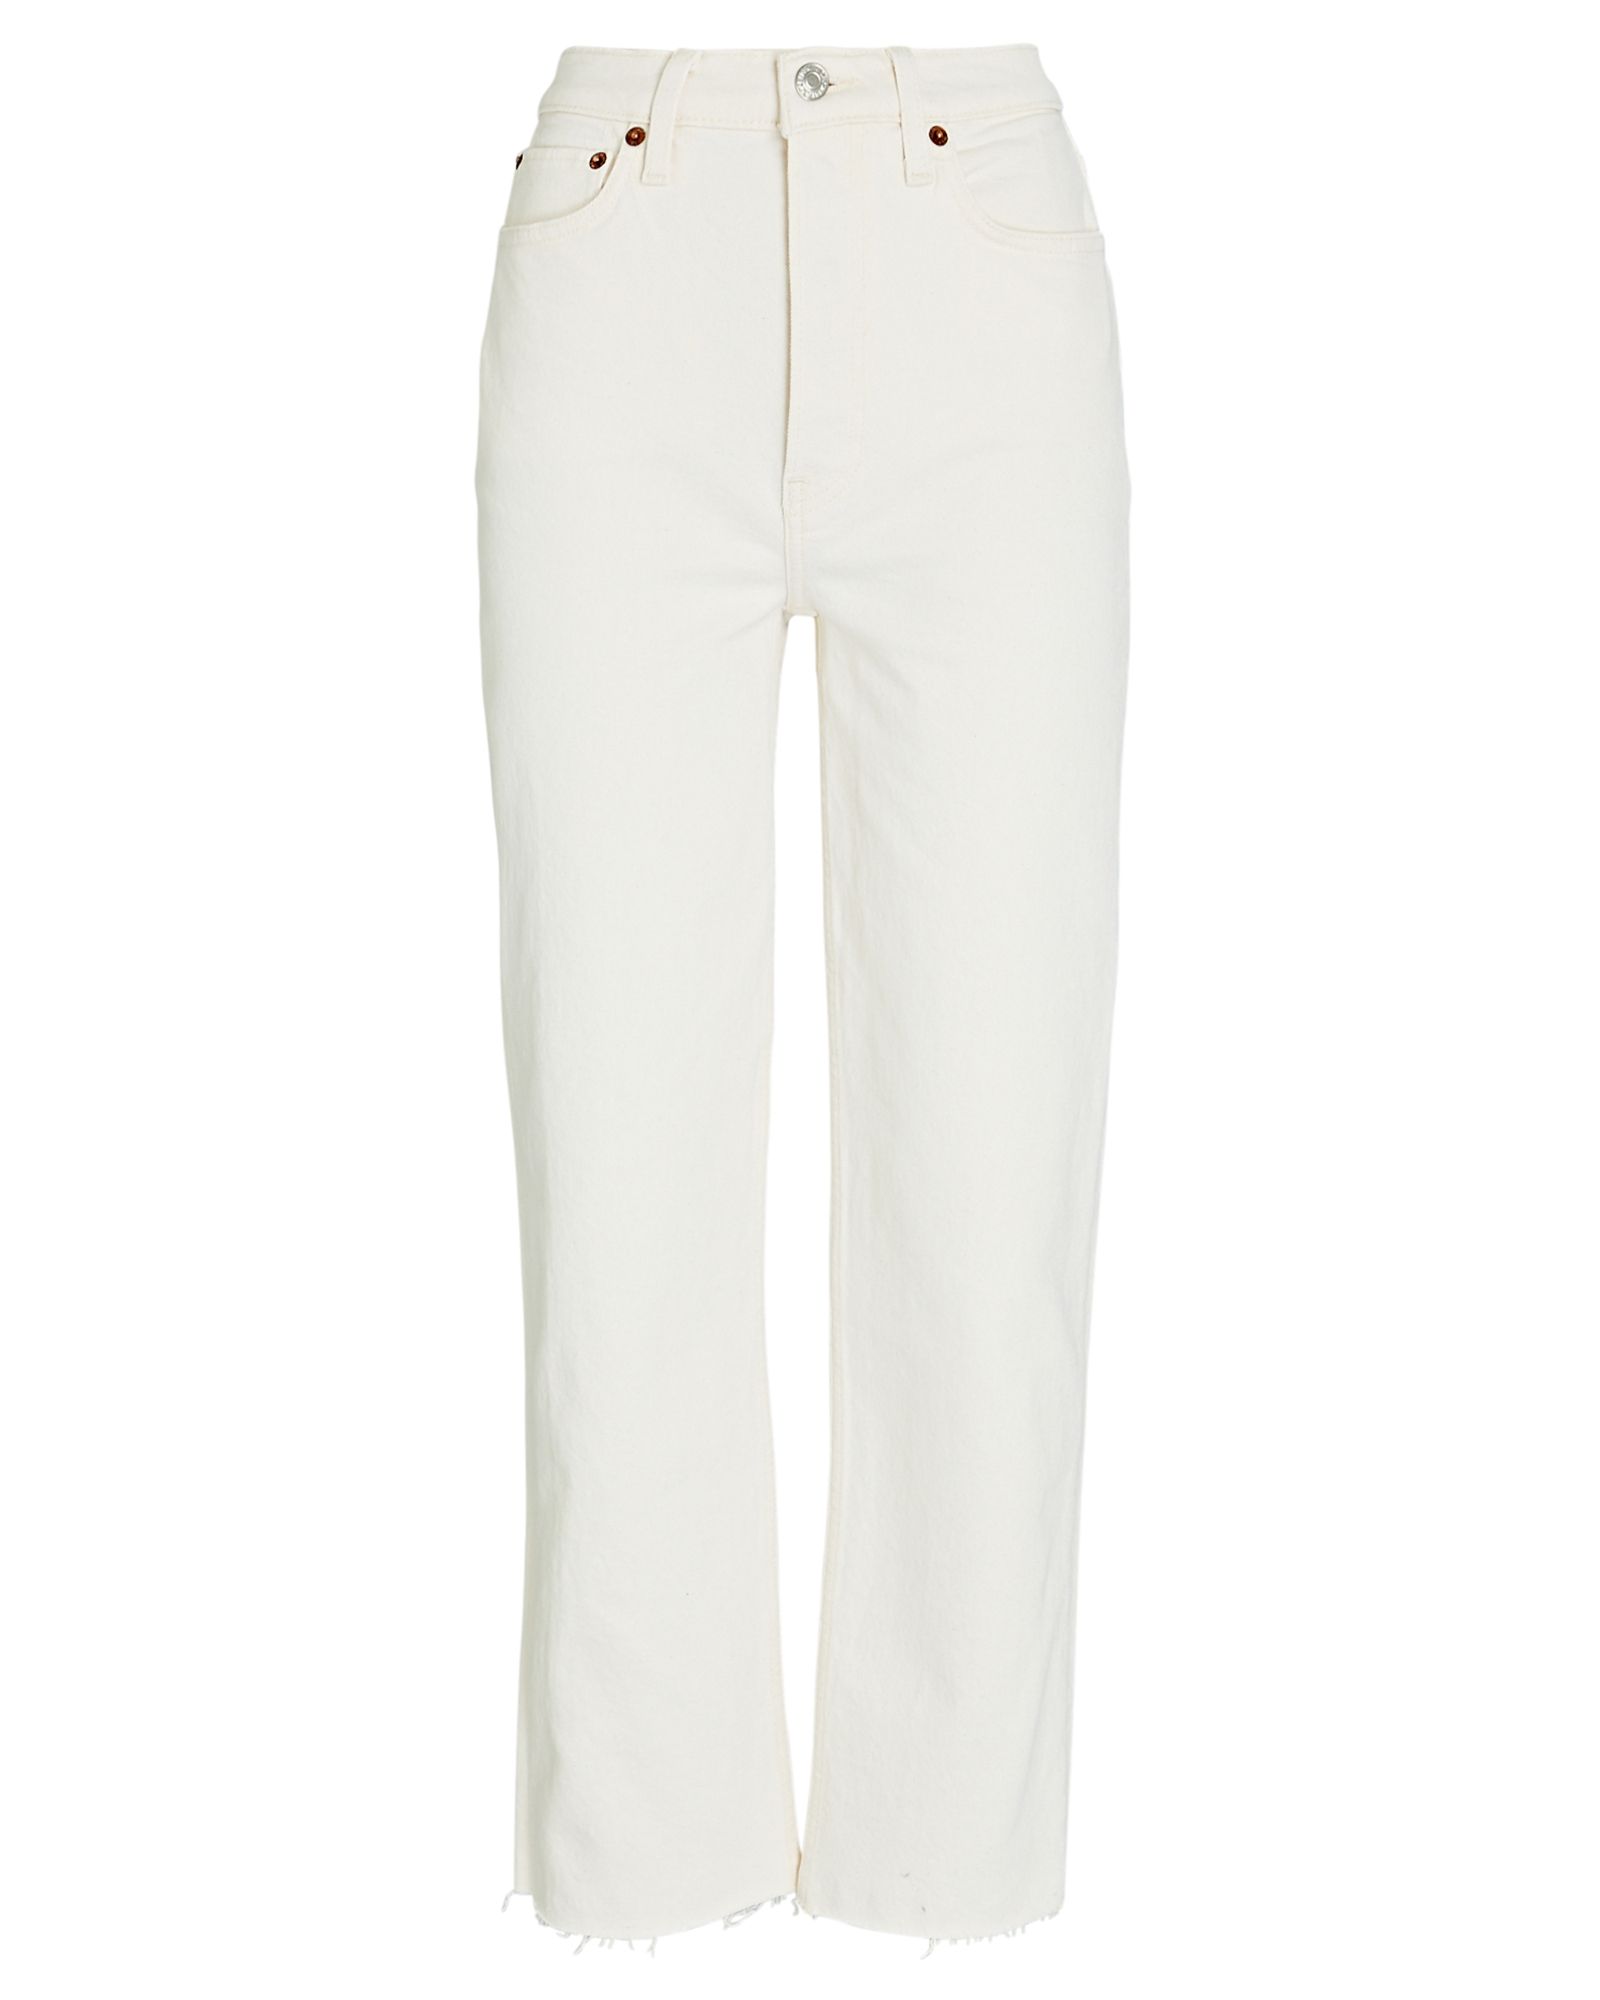 RE/DONE 70s High-Rise Stove Pipe Jeans, Ivory 30 | INTERMIX